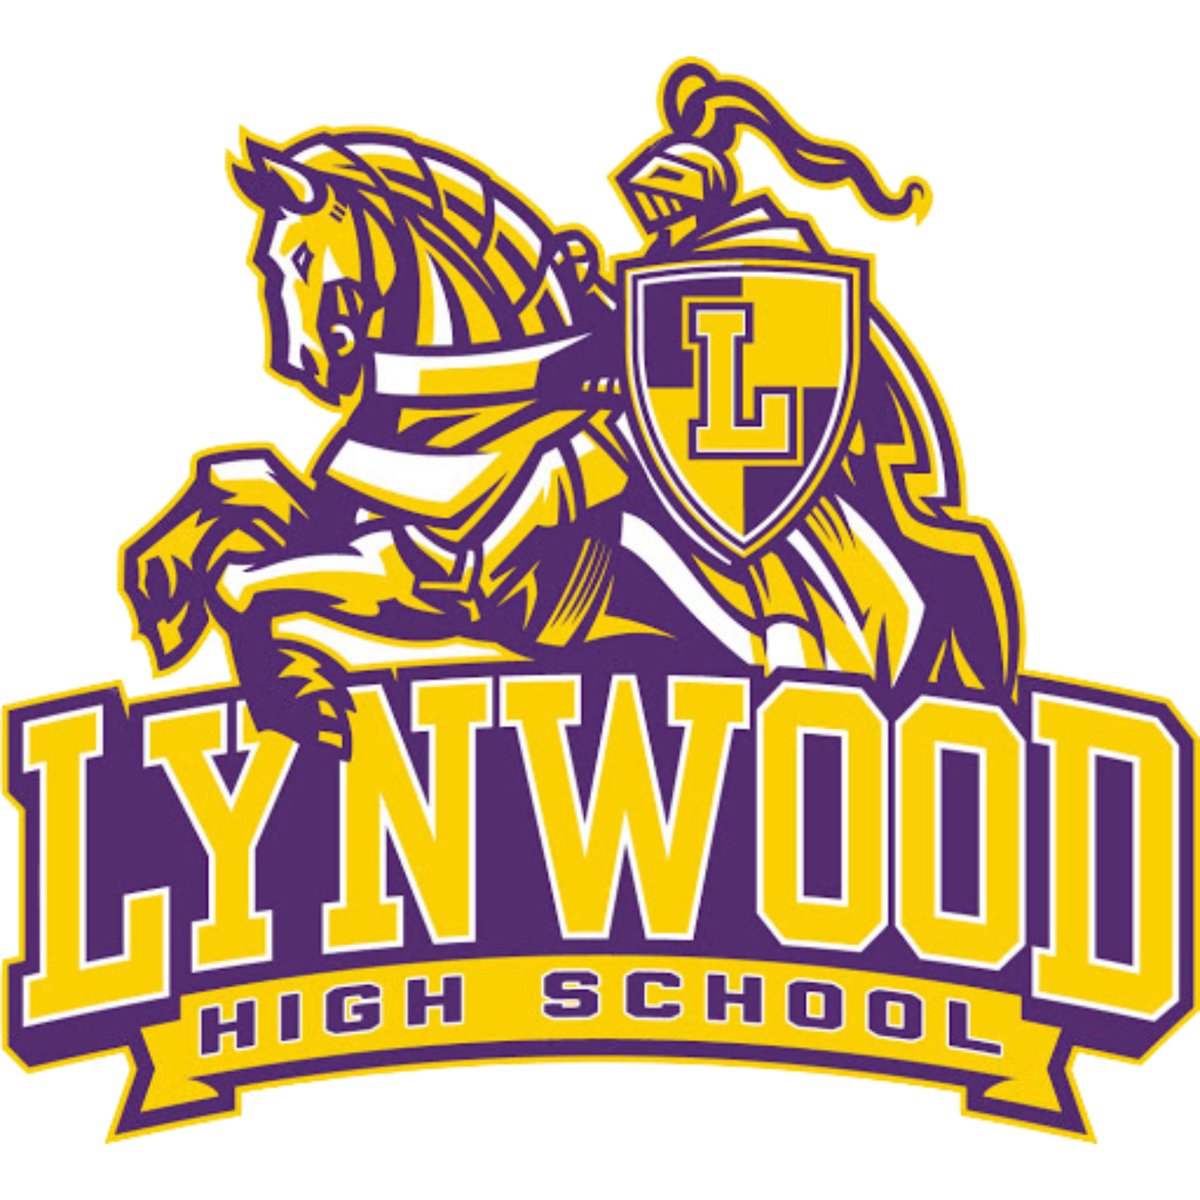 Breaking: Former Legacy High School Head Coach Chris Camper has accepted the Head Coaching position at Lynwood High School